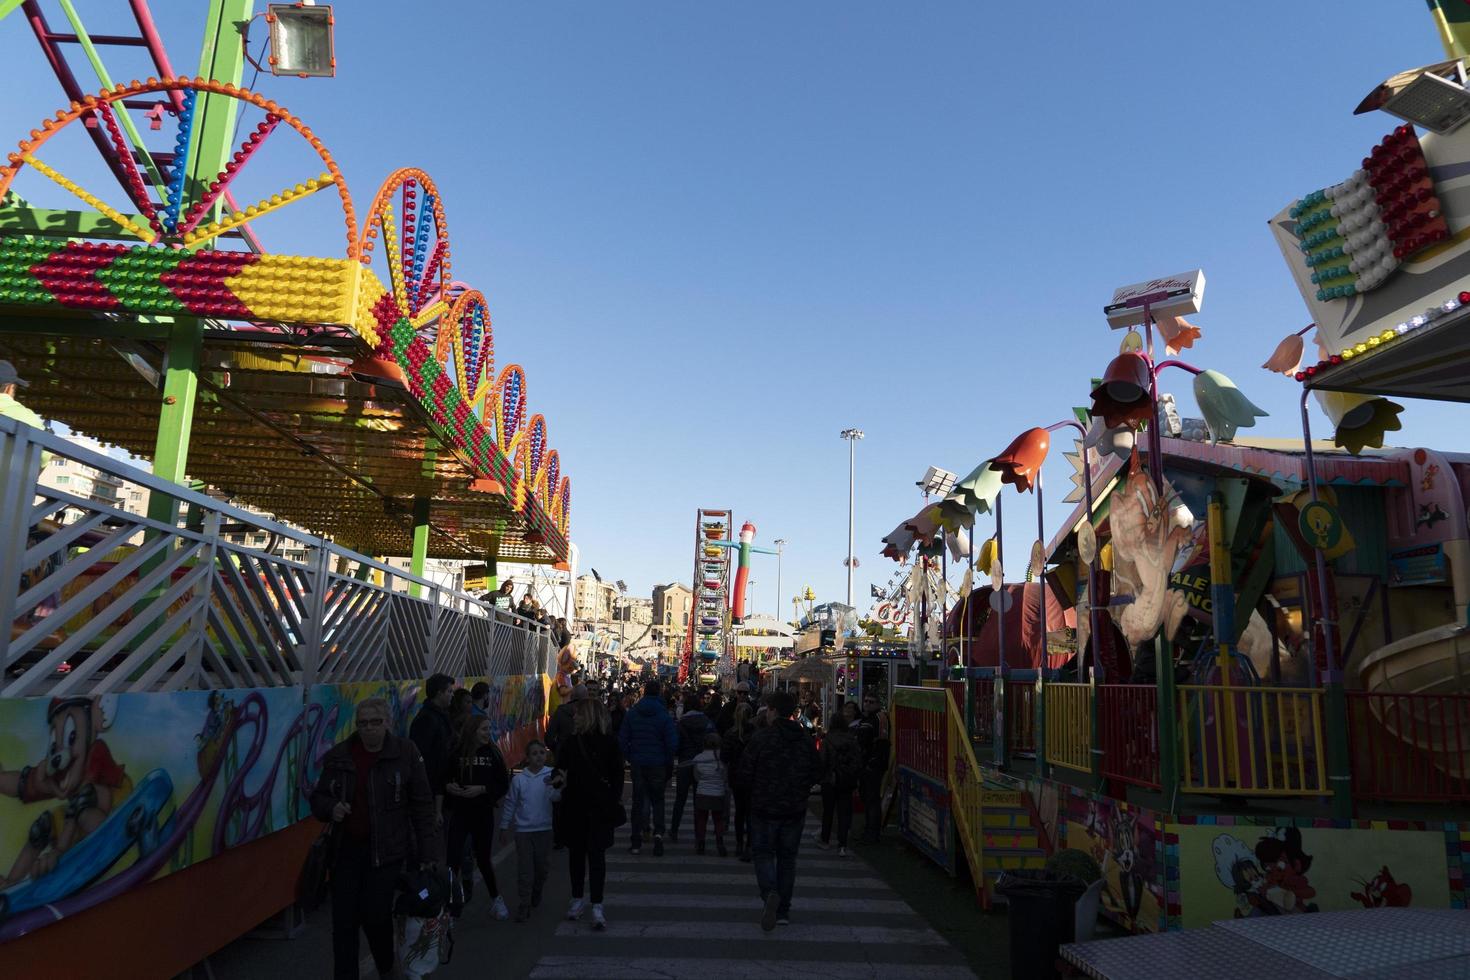 GENOA, ITALY - DECEMBER, 9 2018 - Traditional Christmas Luna Park Fun Fair is opened photo